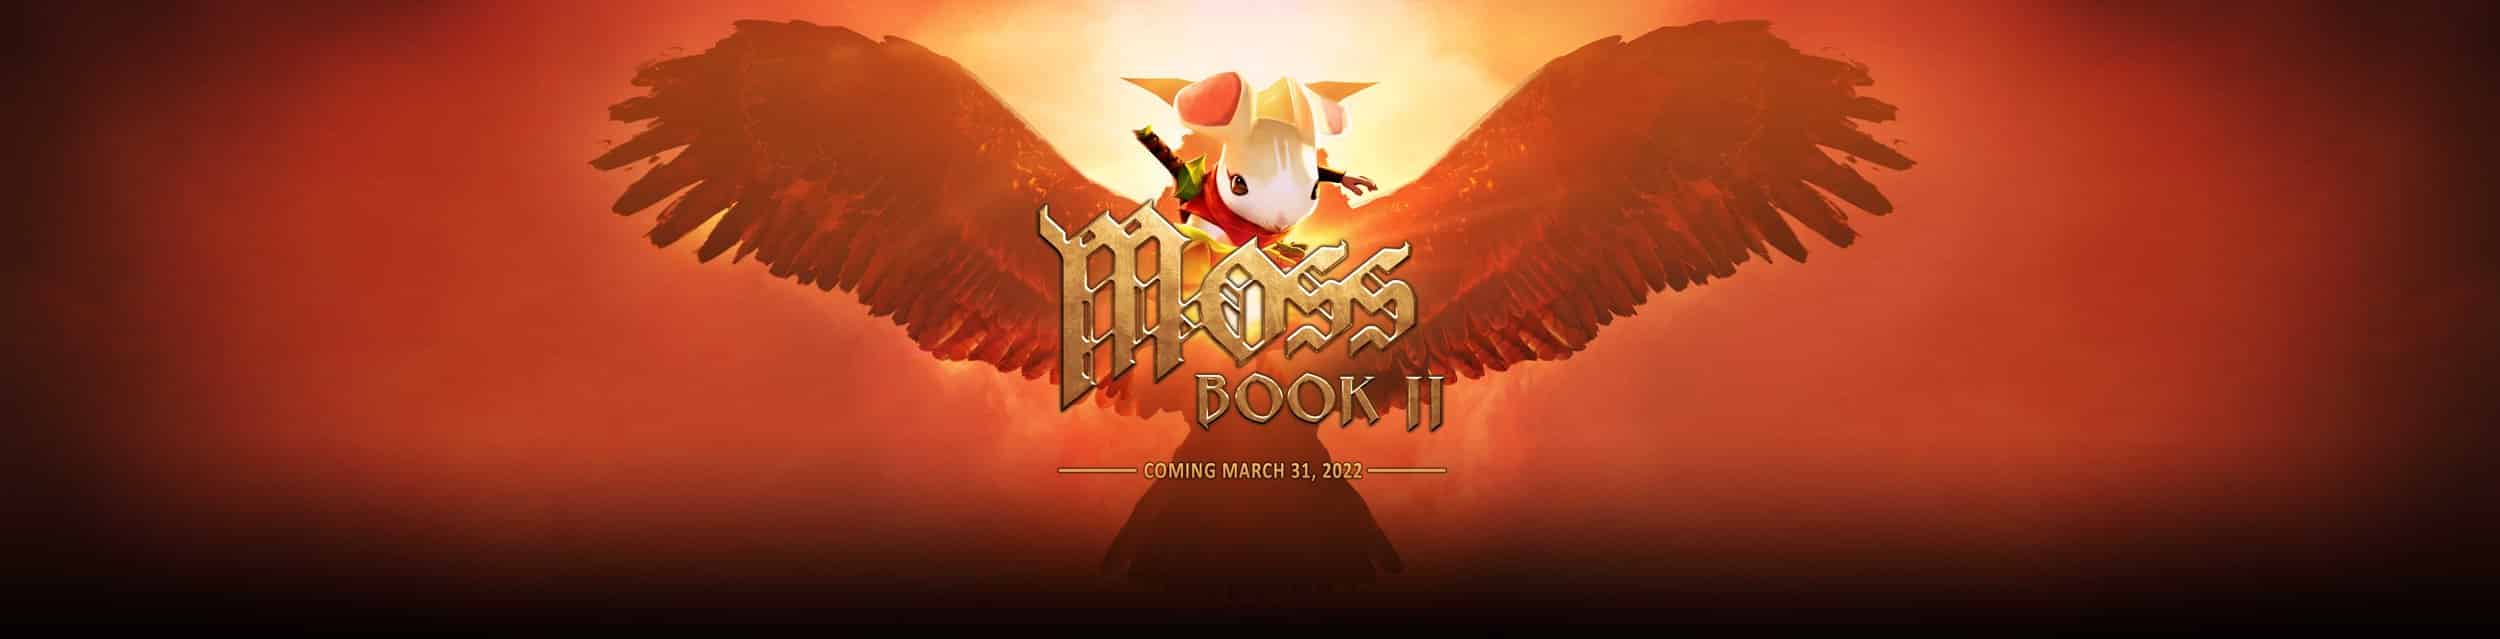 Moss Book II player count stats